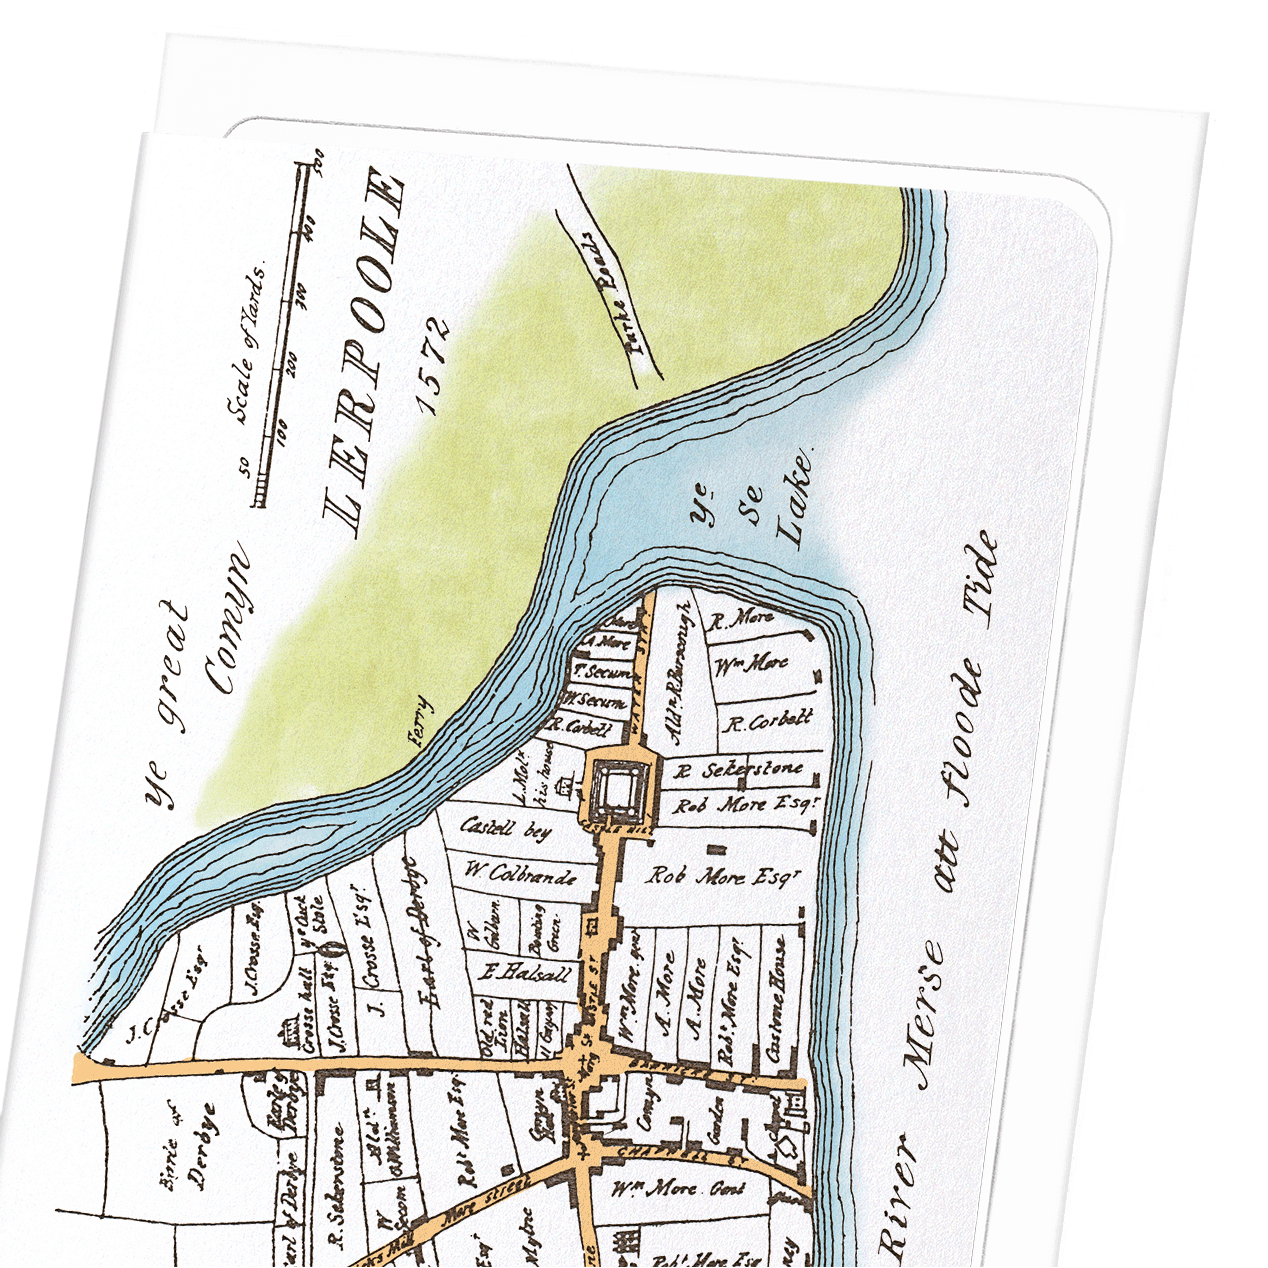 LIVERPOOL MAP (1572): Map antique Greeting Card